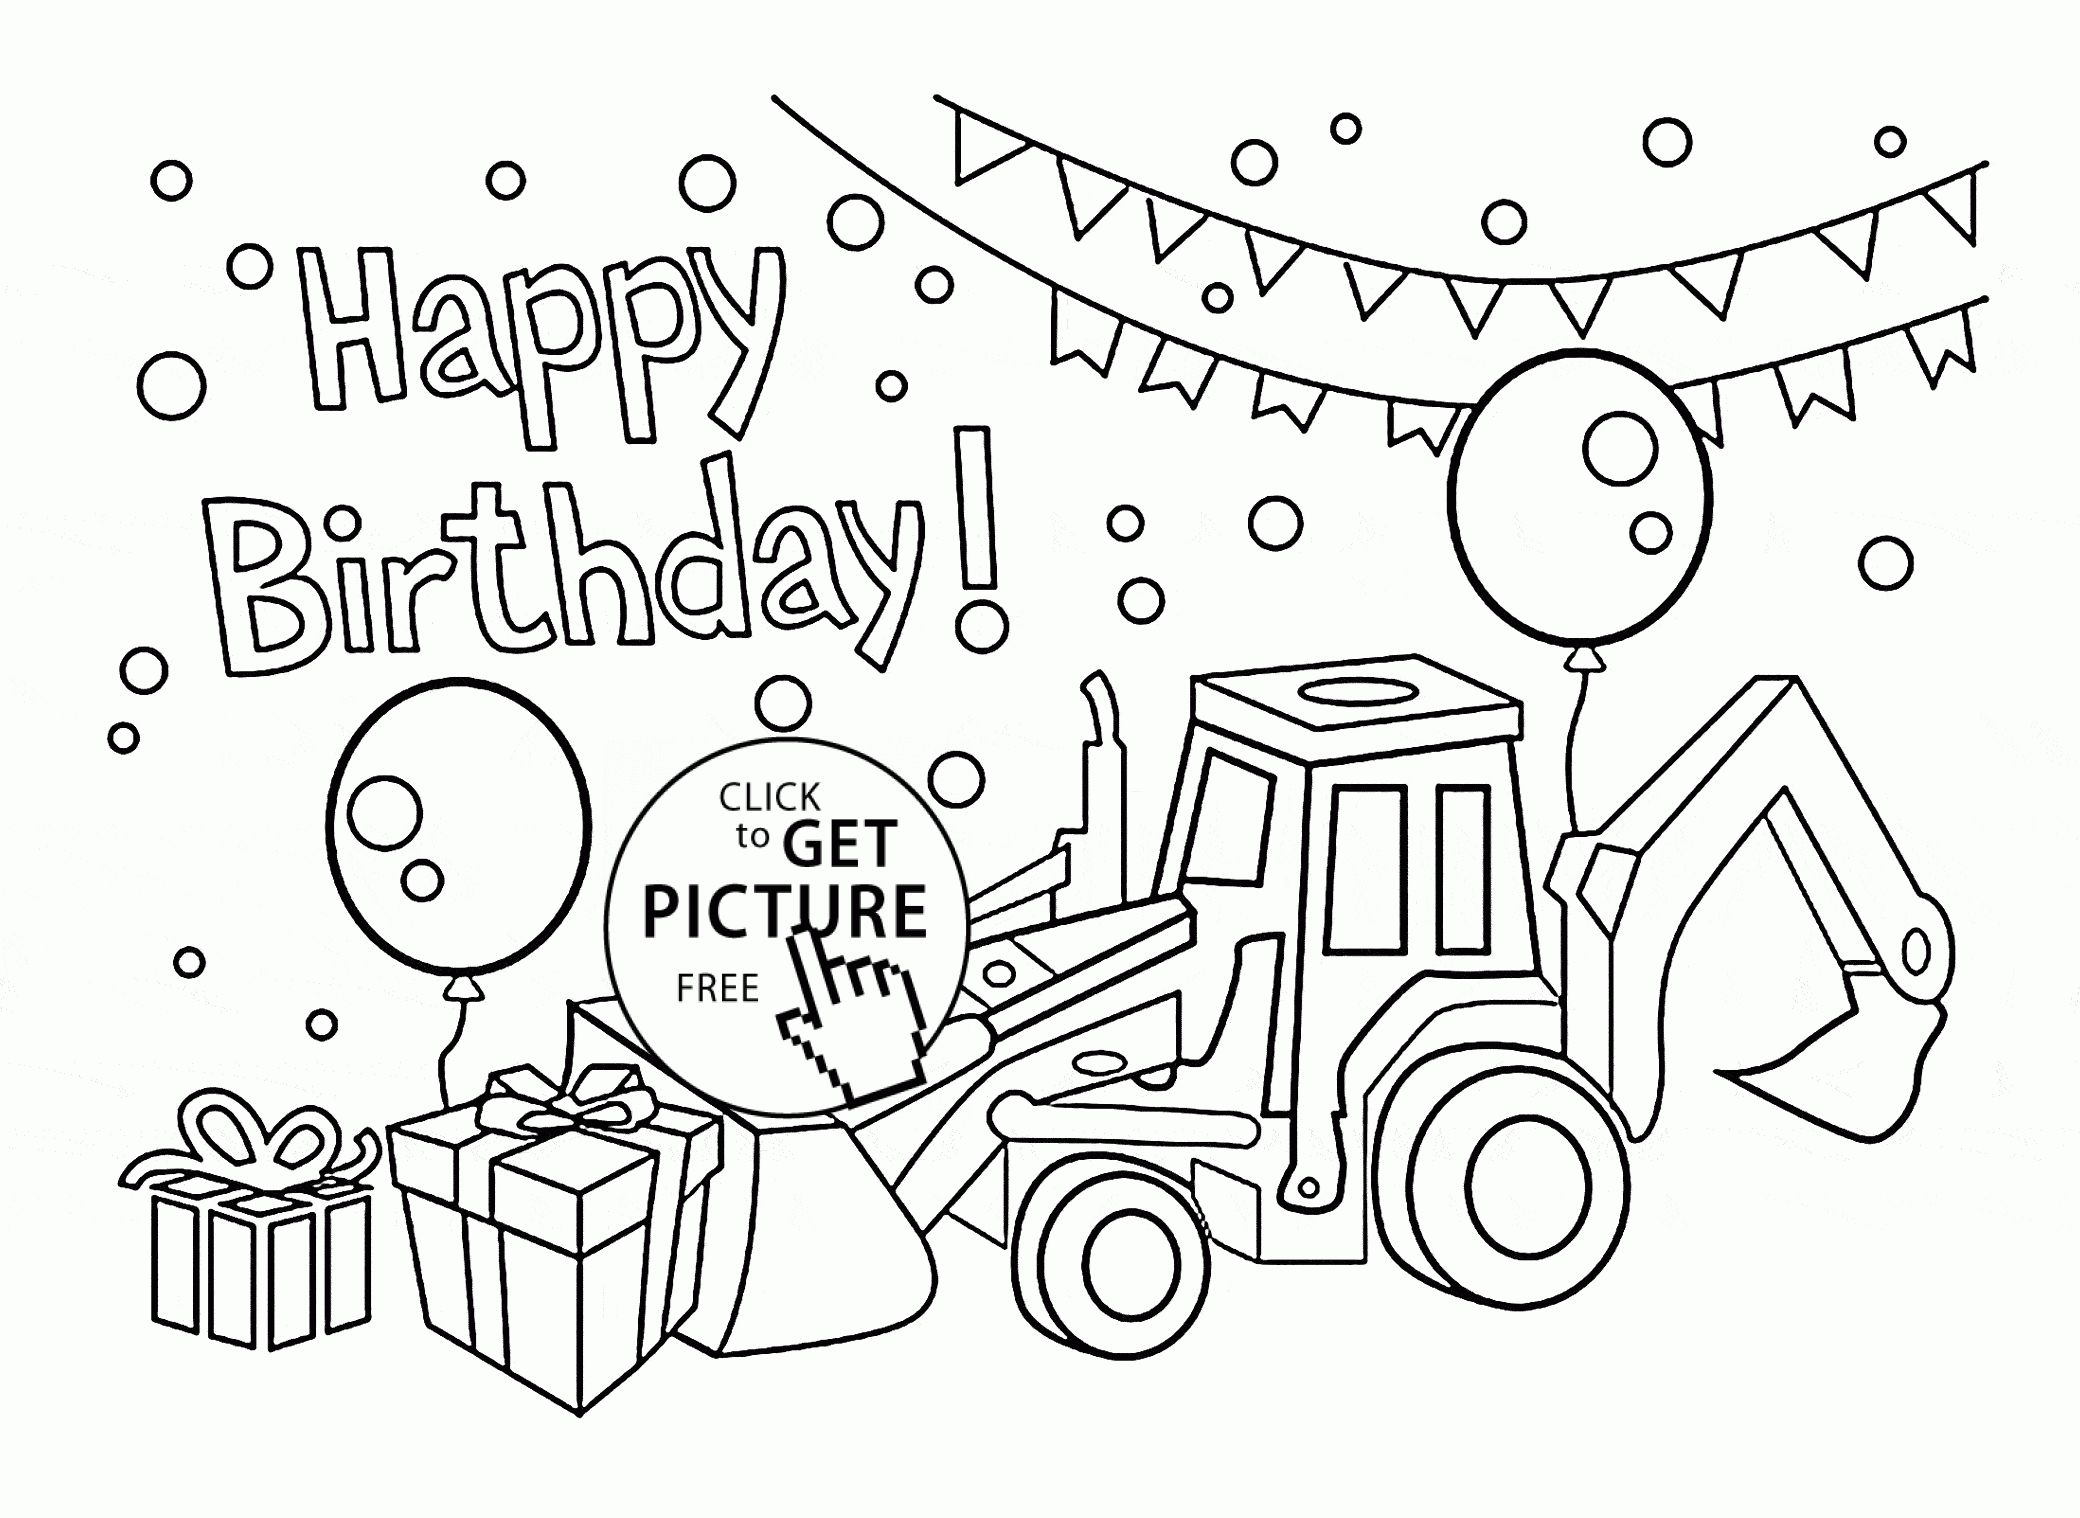 Happy Birthday Card For Boys Coloring Page For Kids, Holiday - Free Printable Kids Birthday Cards Boys